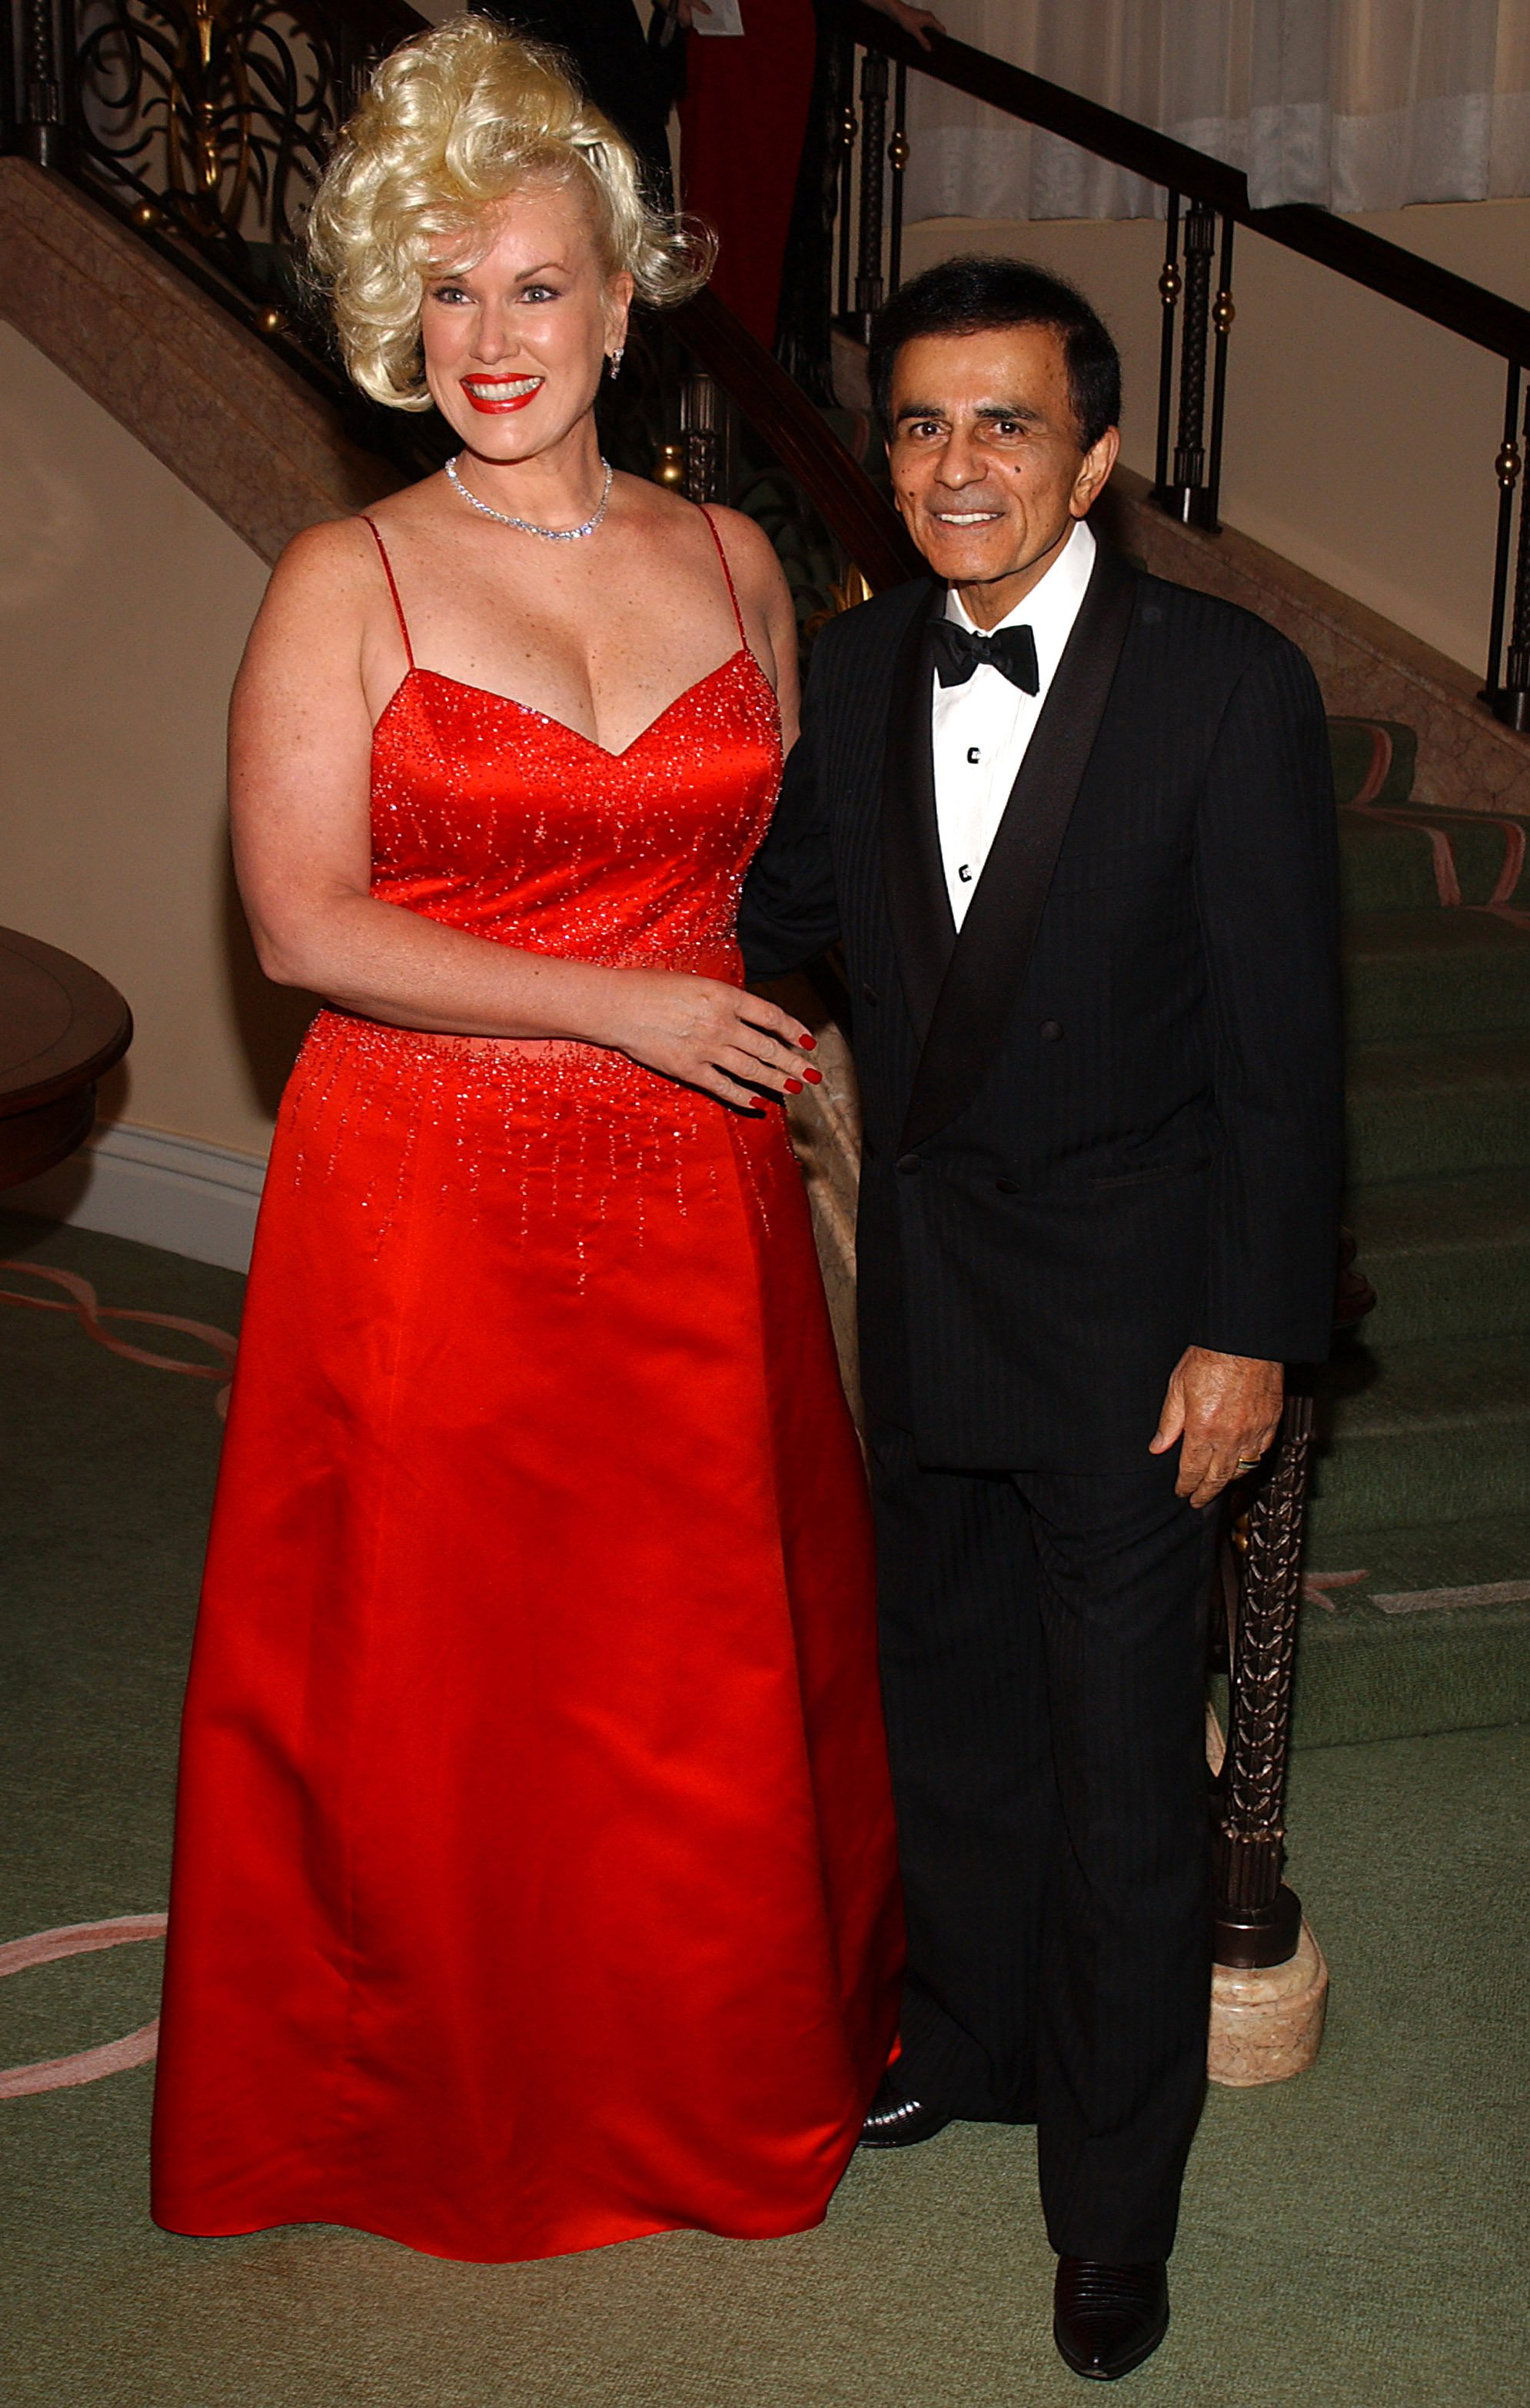 Casey Kasem and his wife Jean in Beverley Hills 2003. |  Source: Getty Images